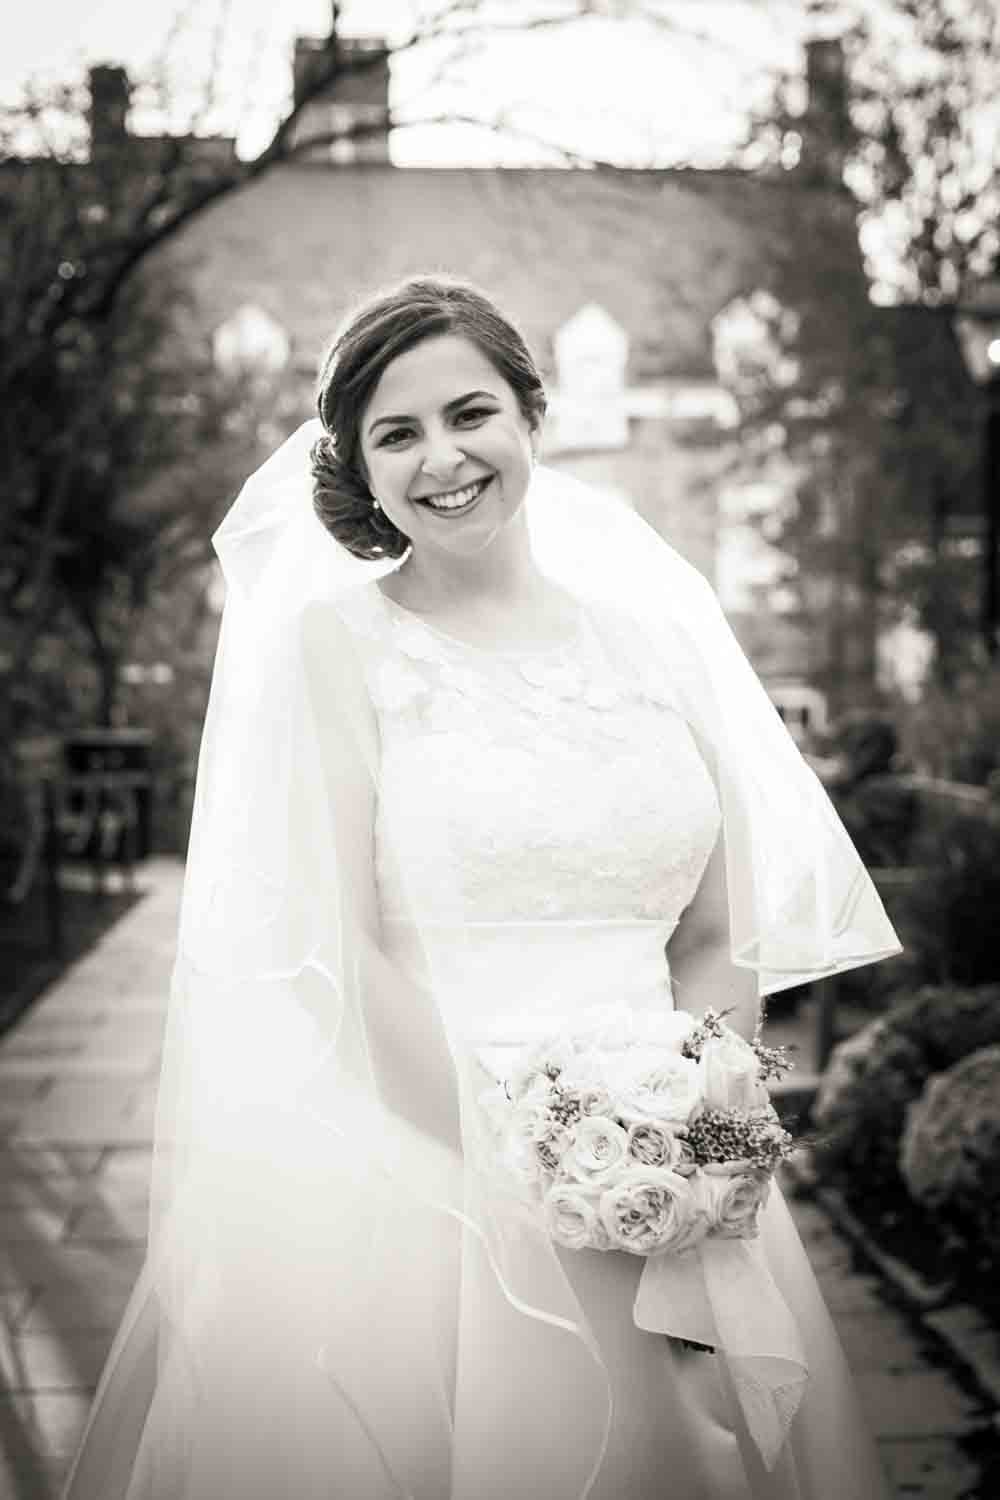 Black and white portrait of bride outdoors